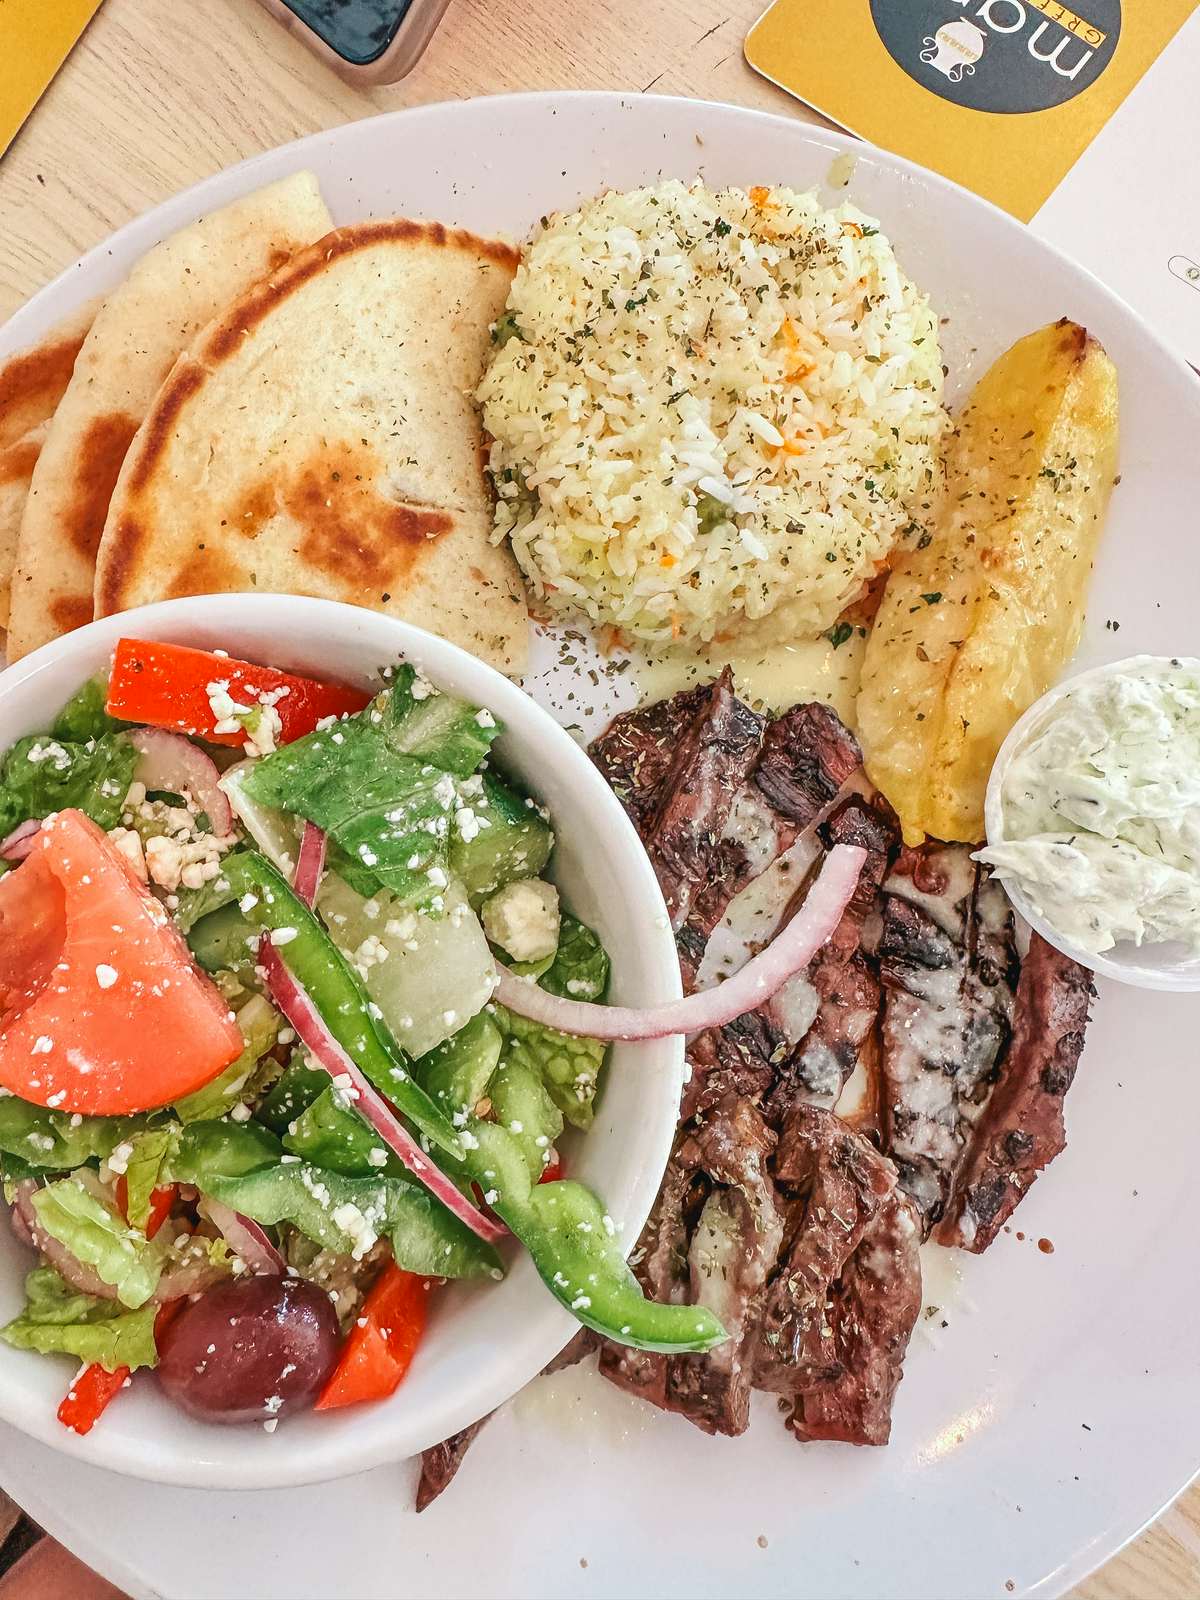 Lunch plate from Mana Greek Fusion in Jupiter